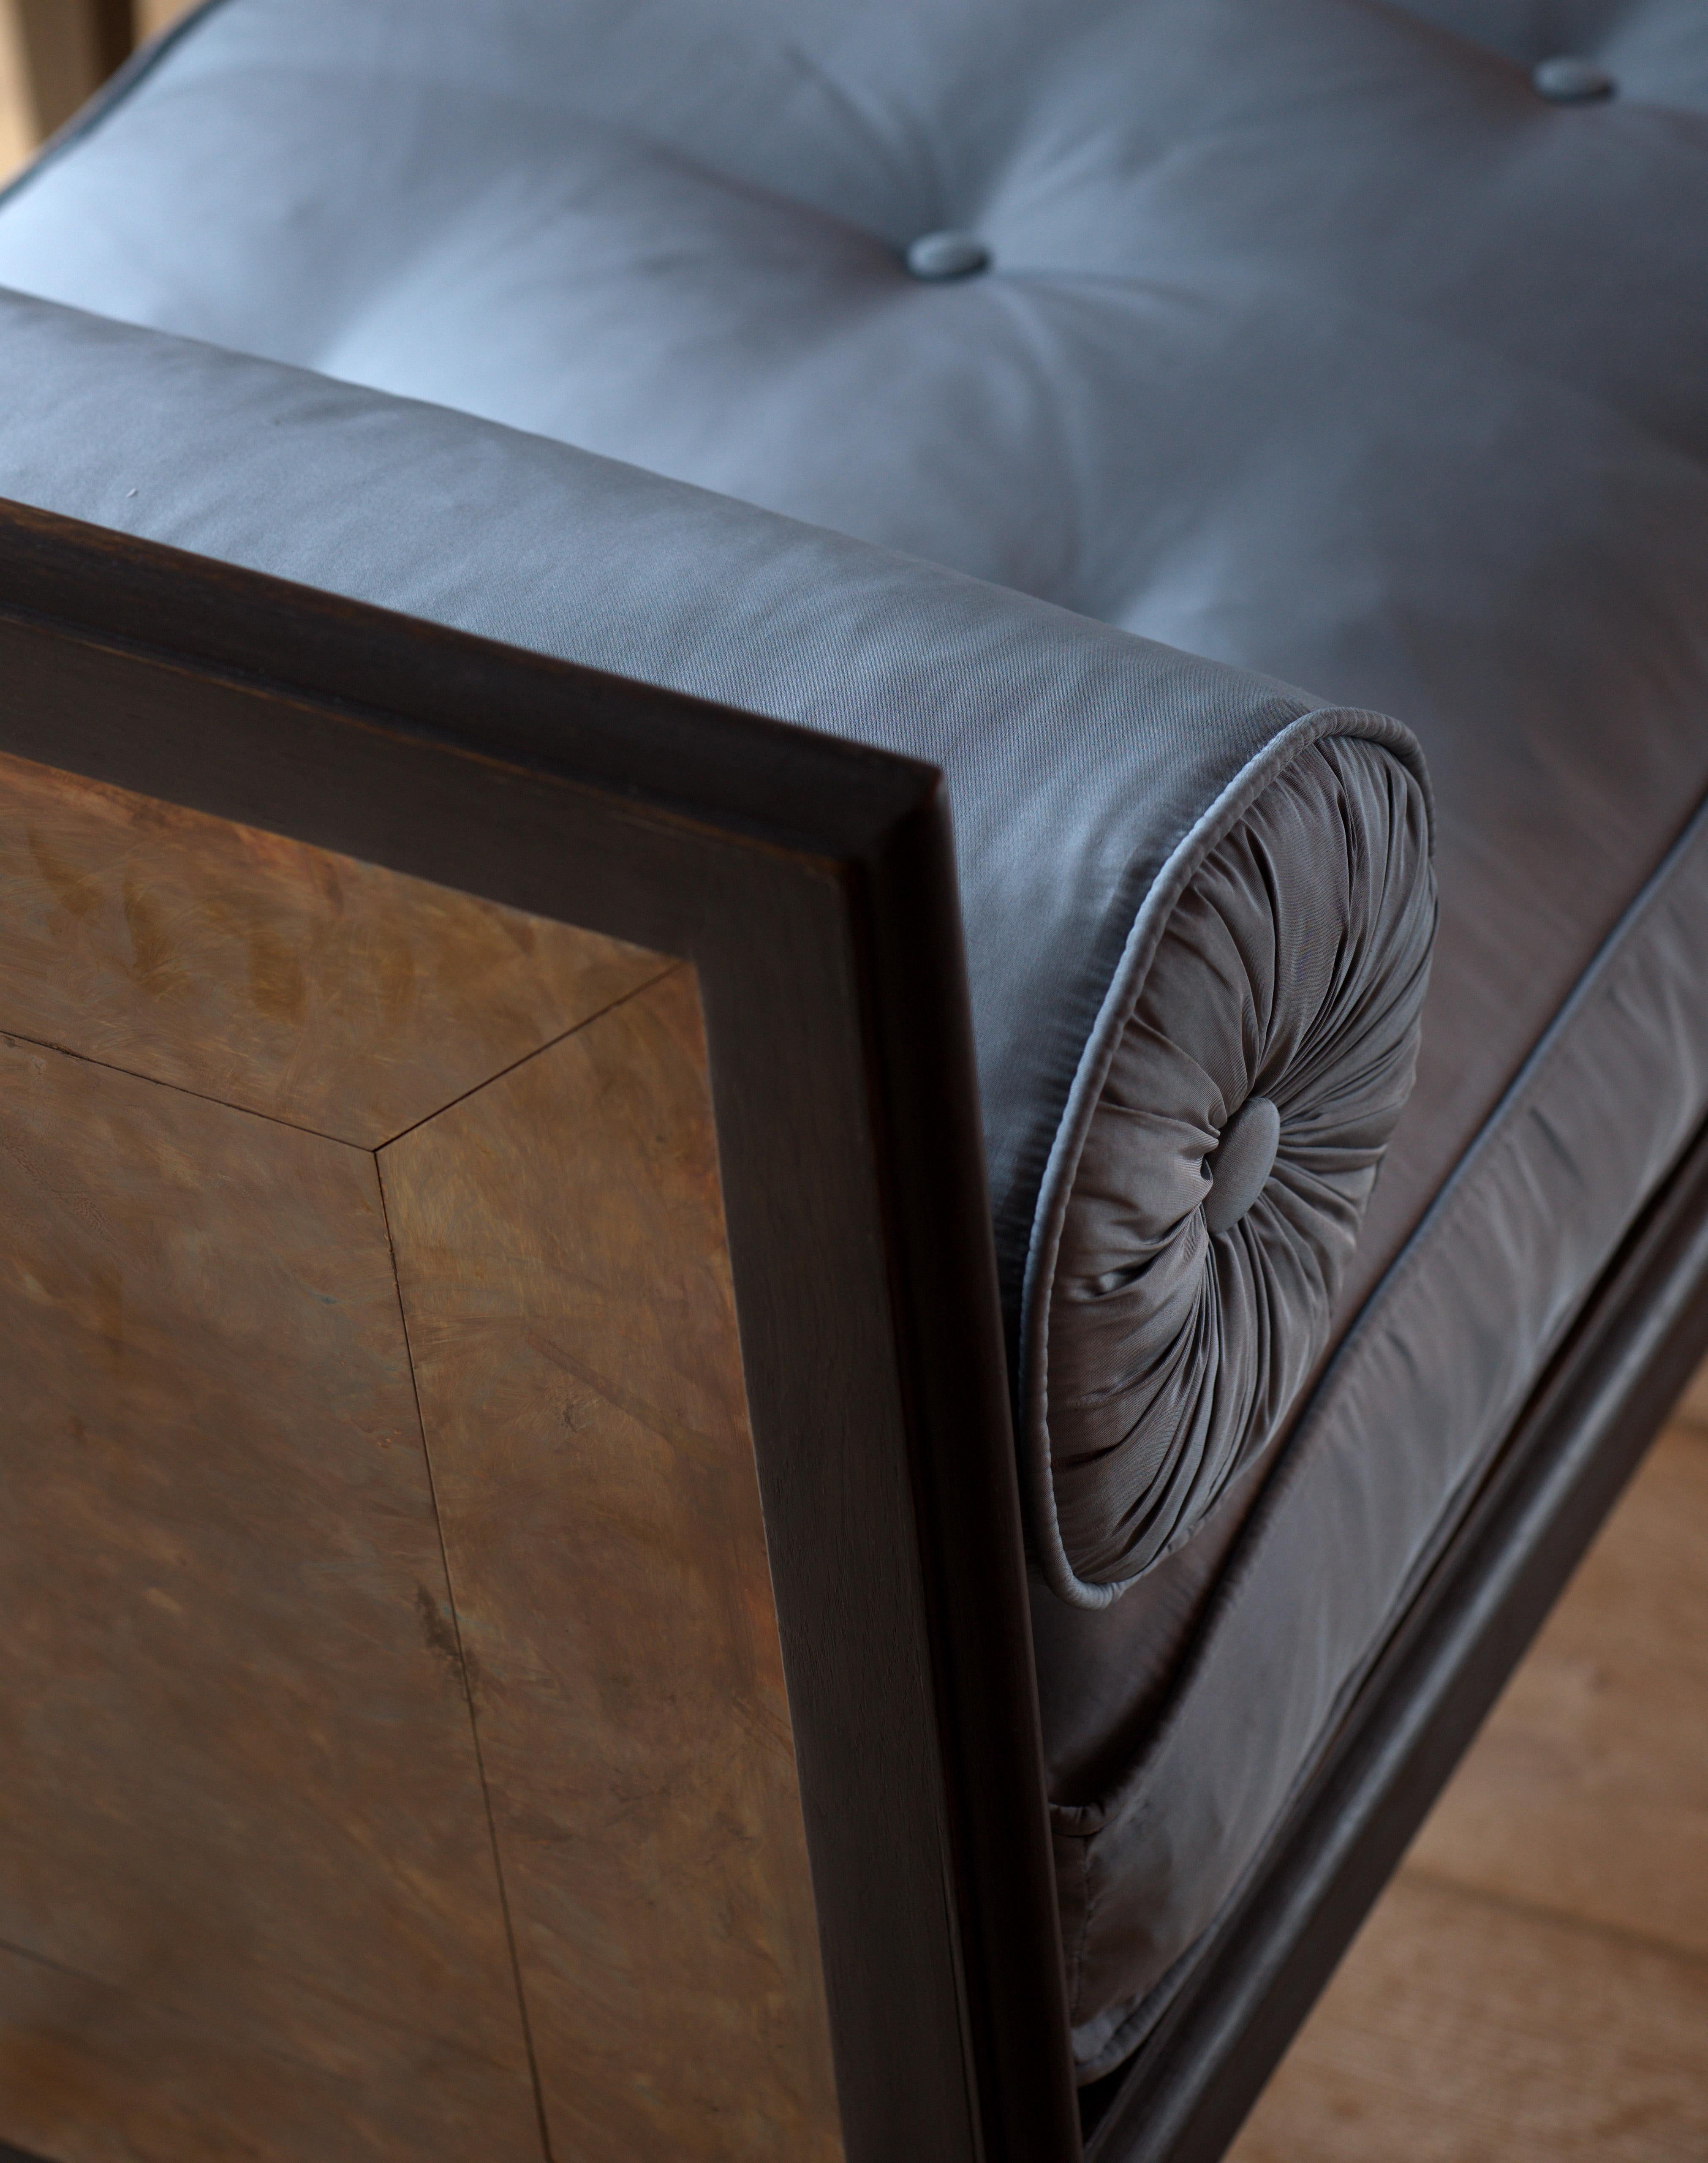 An ebonized oak and patinated bronze mounted window seat of neoclassical form, the cushion and bolsters covered in silk taffeta.
B.B. - Drawn up in front of a fire, at the end of a bed or simply in front of a window. I love the contrast of the